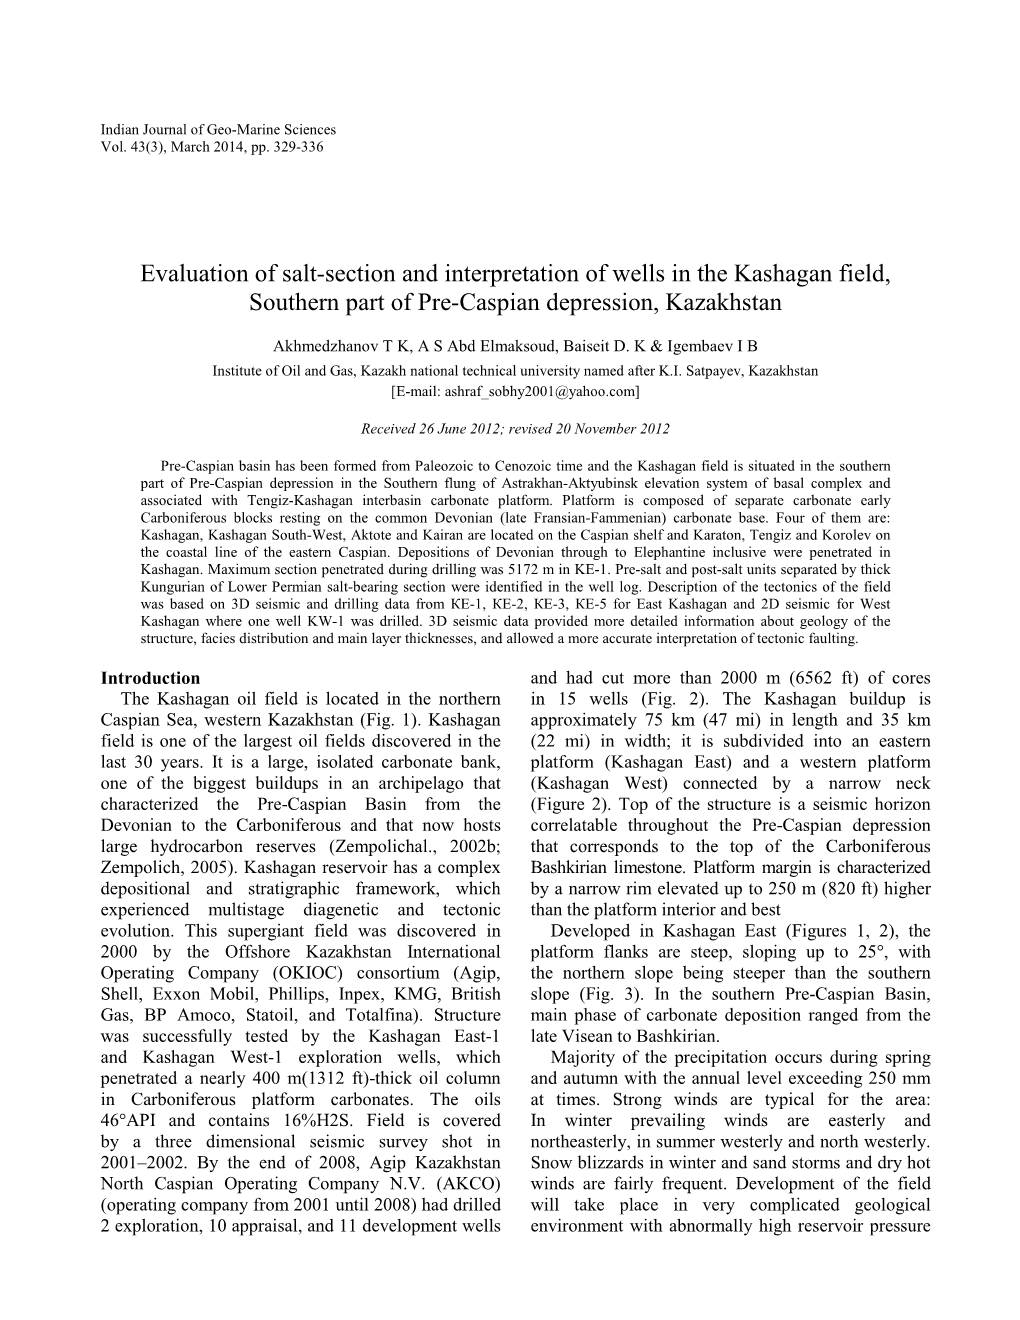 Evaluation of Salt-Section and Interpretation of Wells in the Kashagan Field, Southern Part of Pre-Caspian Depression, Kazakhstan